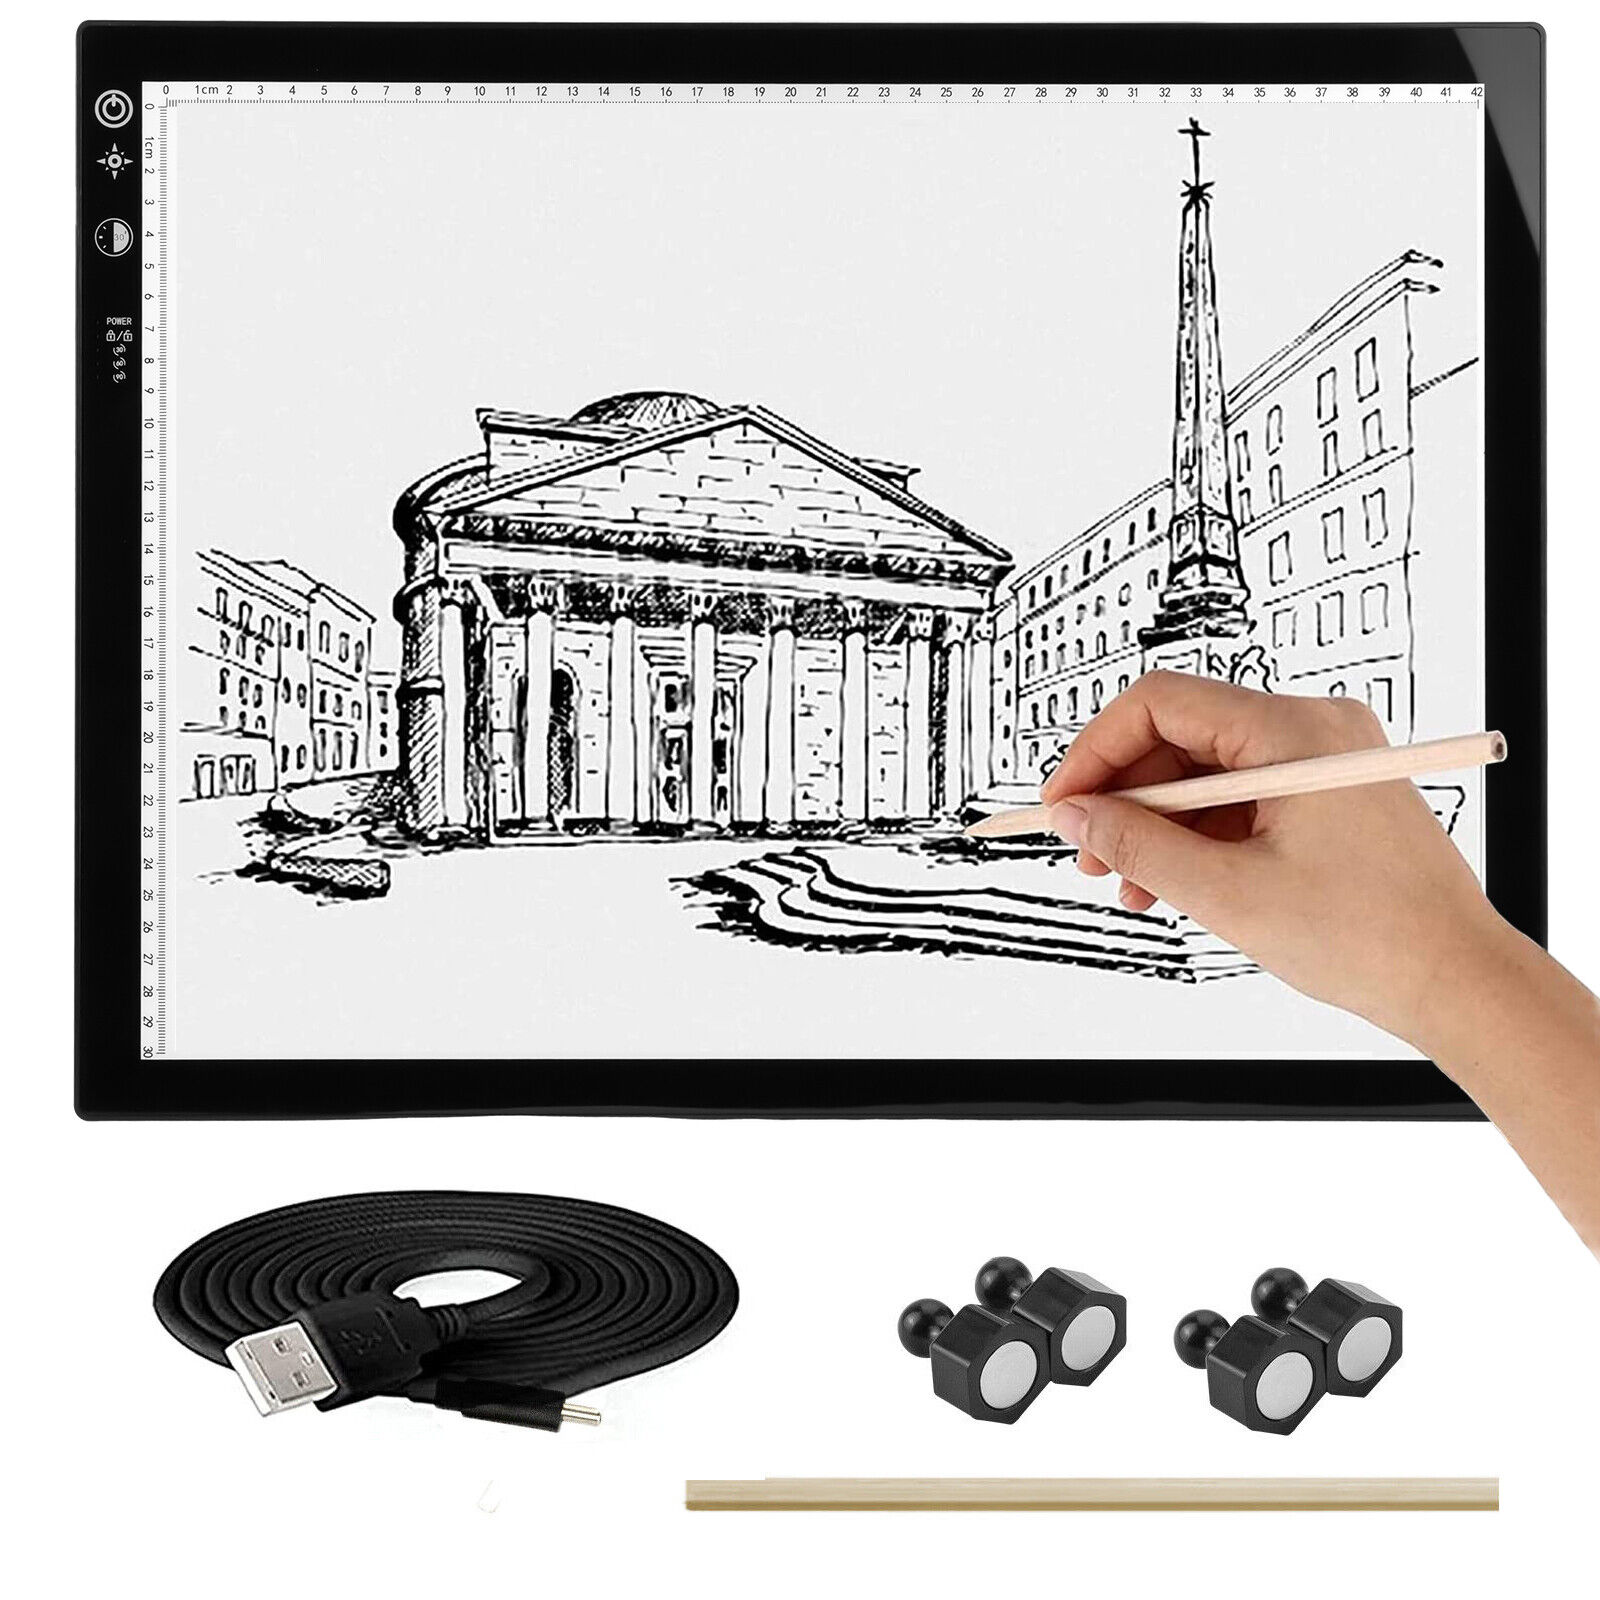 A3 LED Artcraft Tracing Light Pad Box Dimmable Brightness Stencil X-ray Viewing